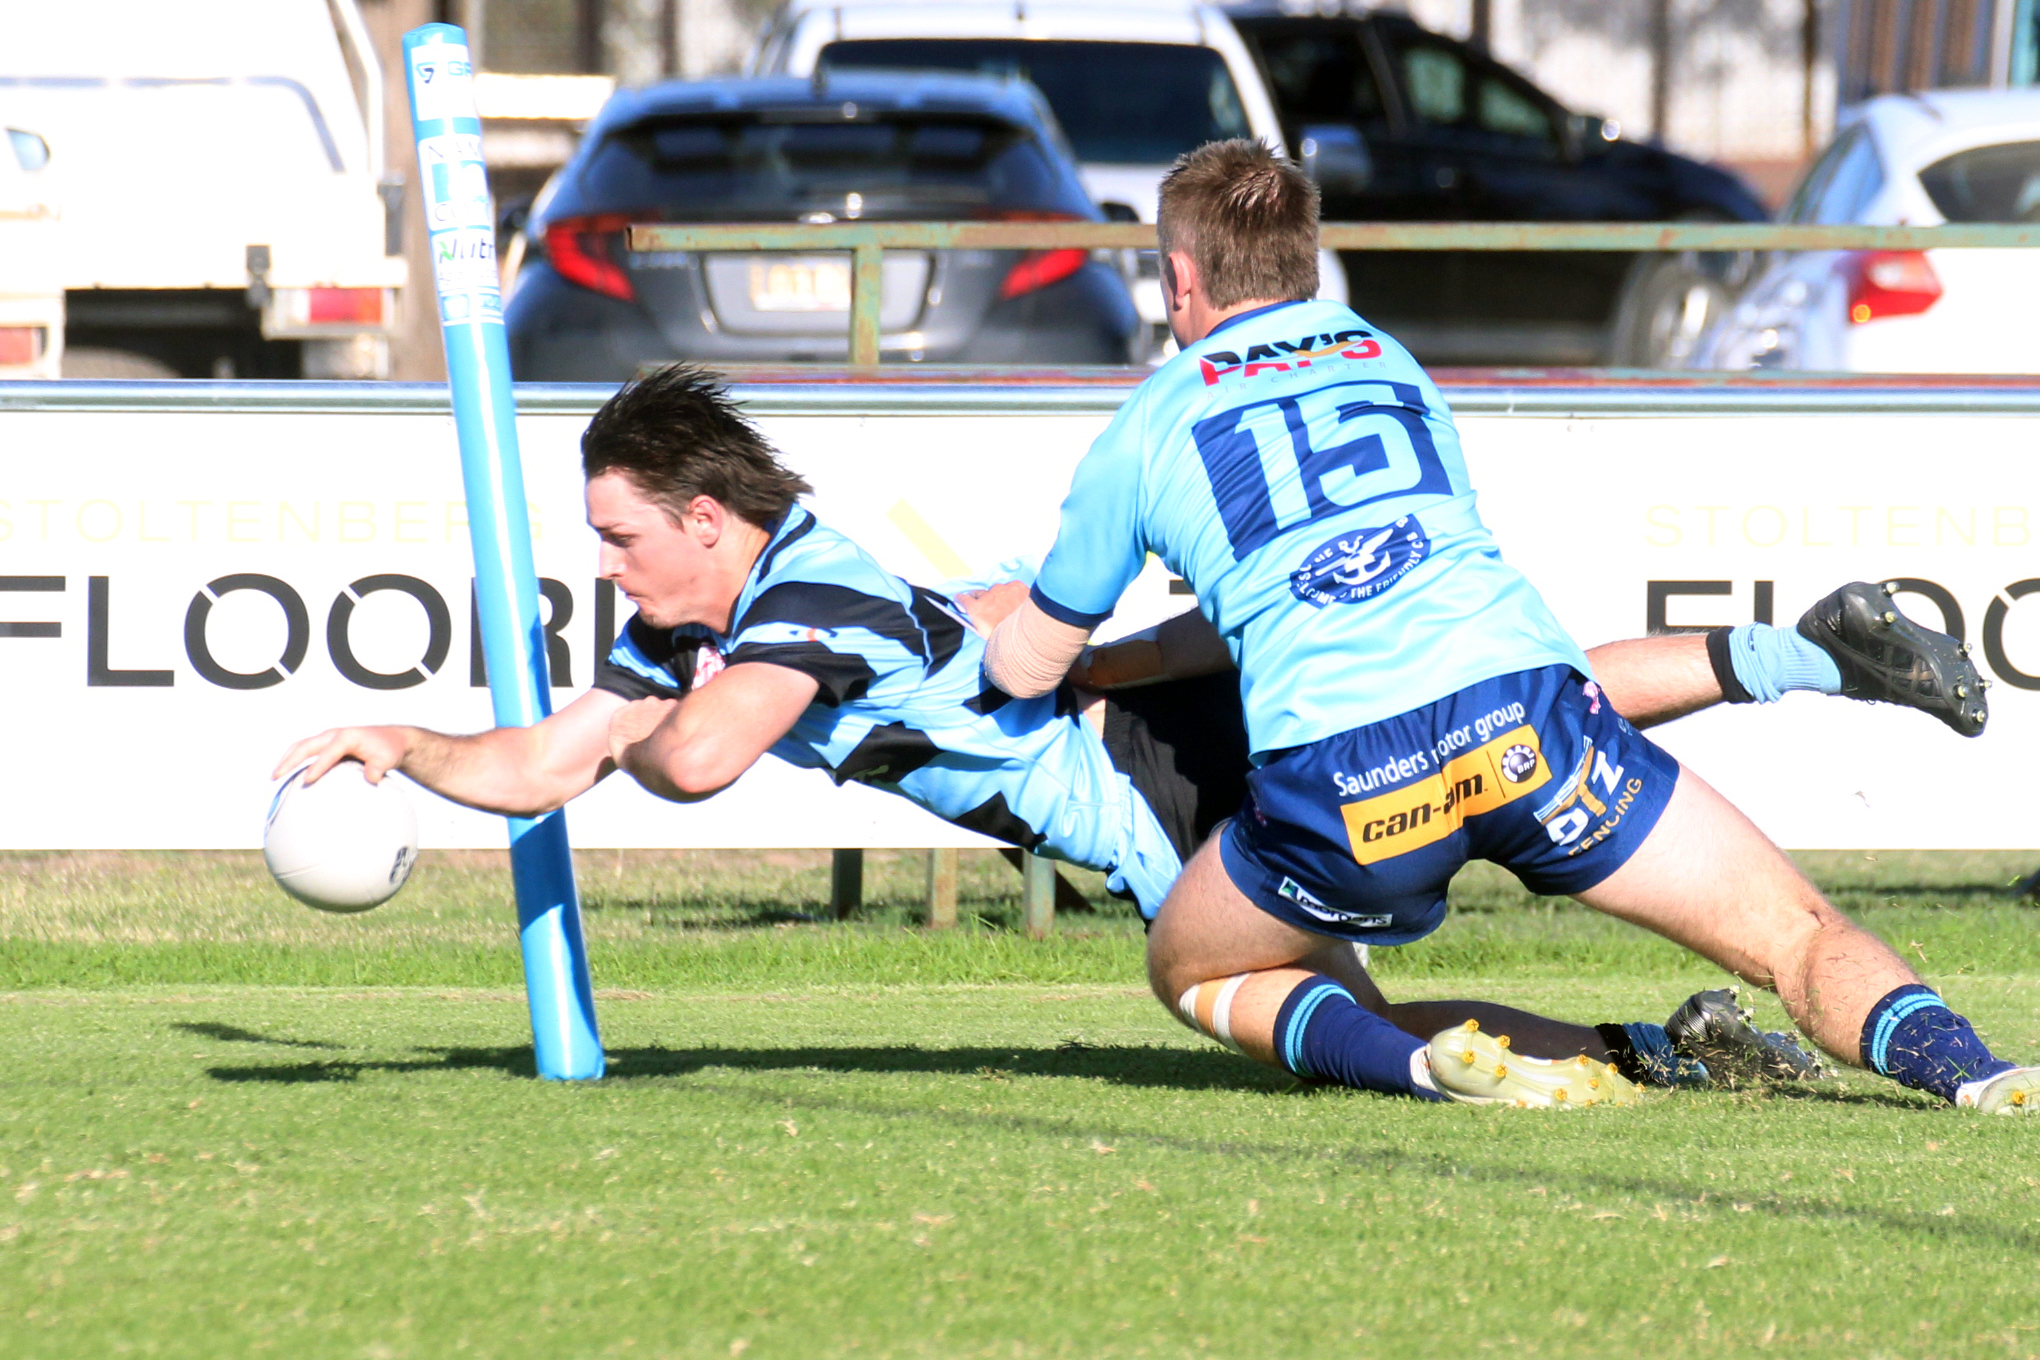 Gleeson thrilled with Blue Boars’ defensive effort in dominant victory on home soil